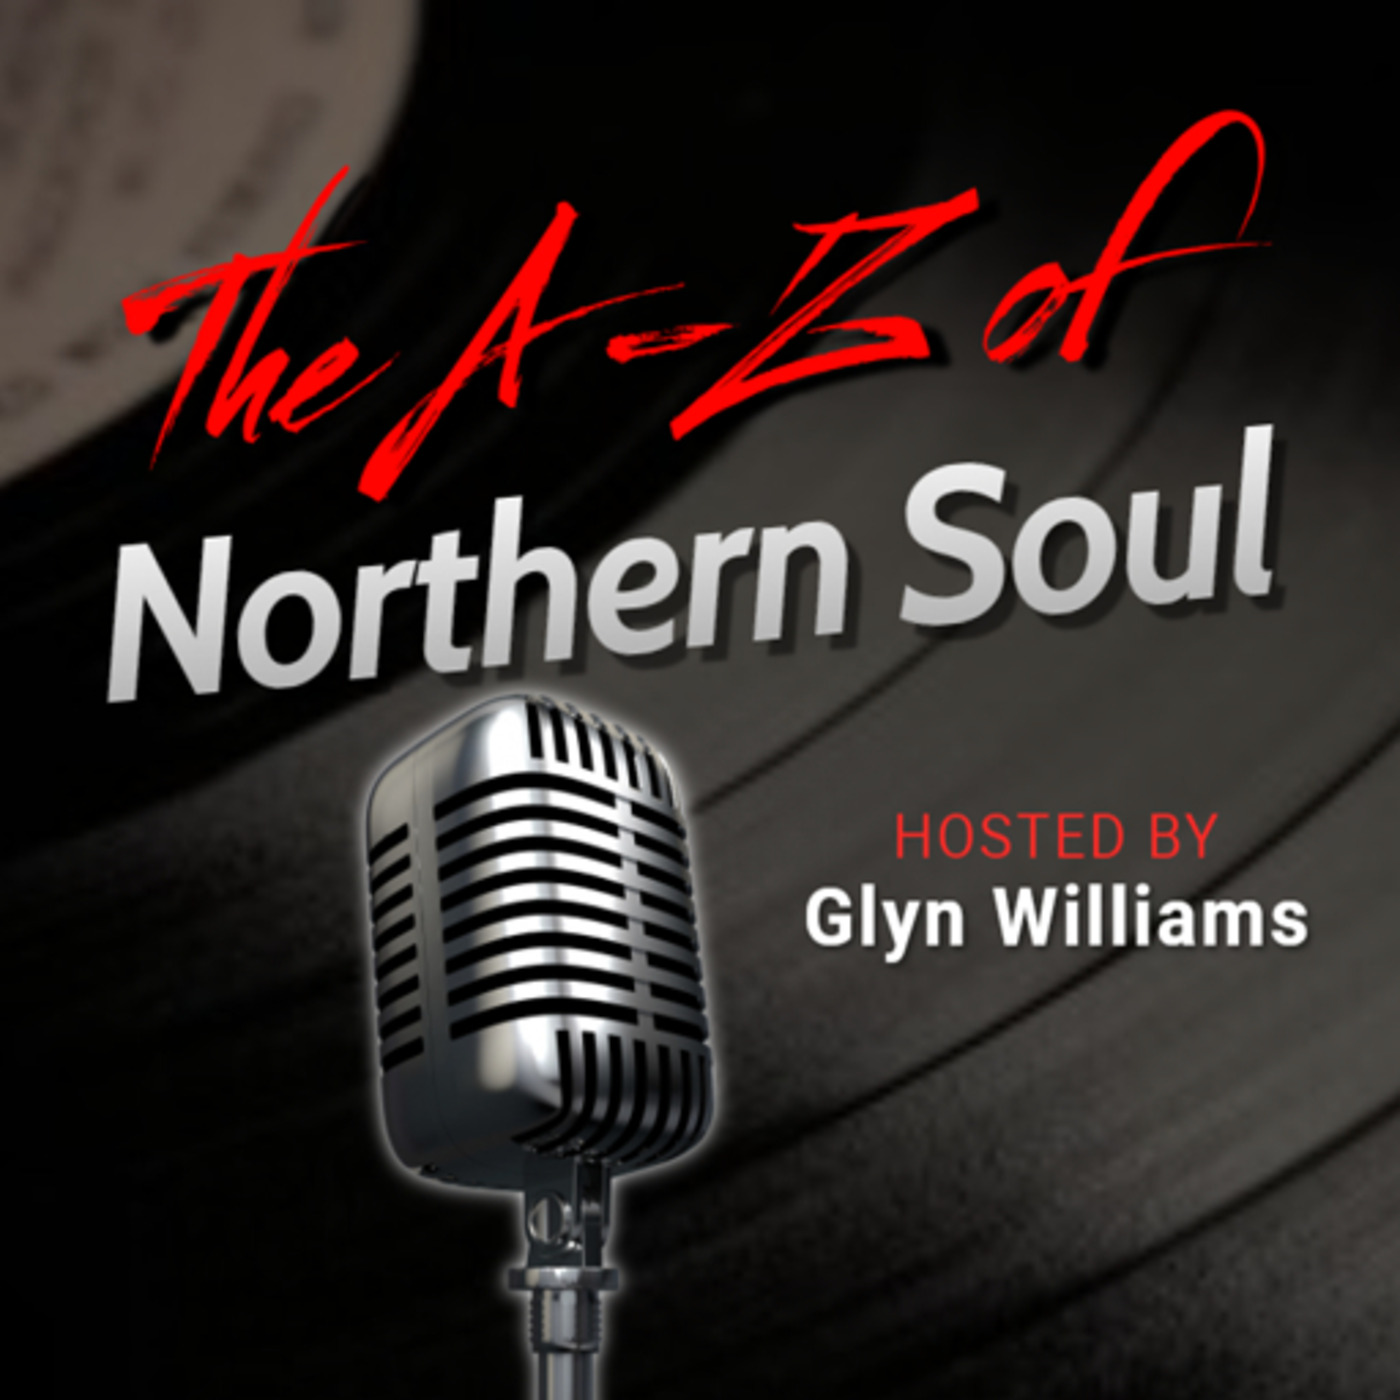 The A-Z of Northern Soul E058